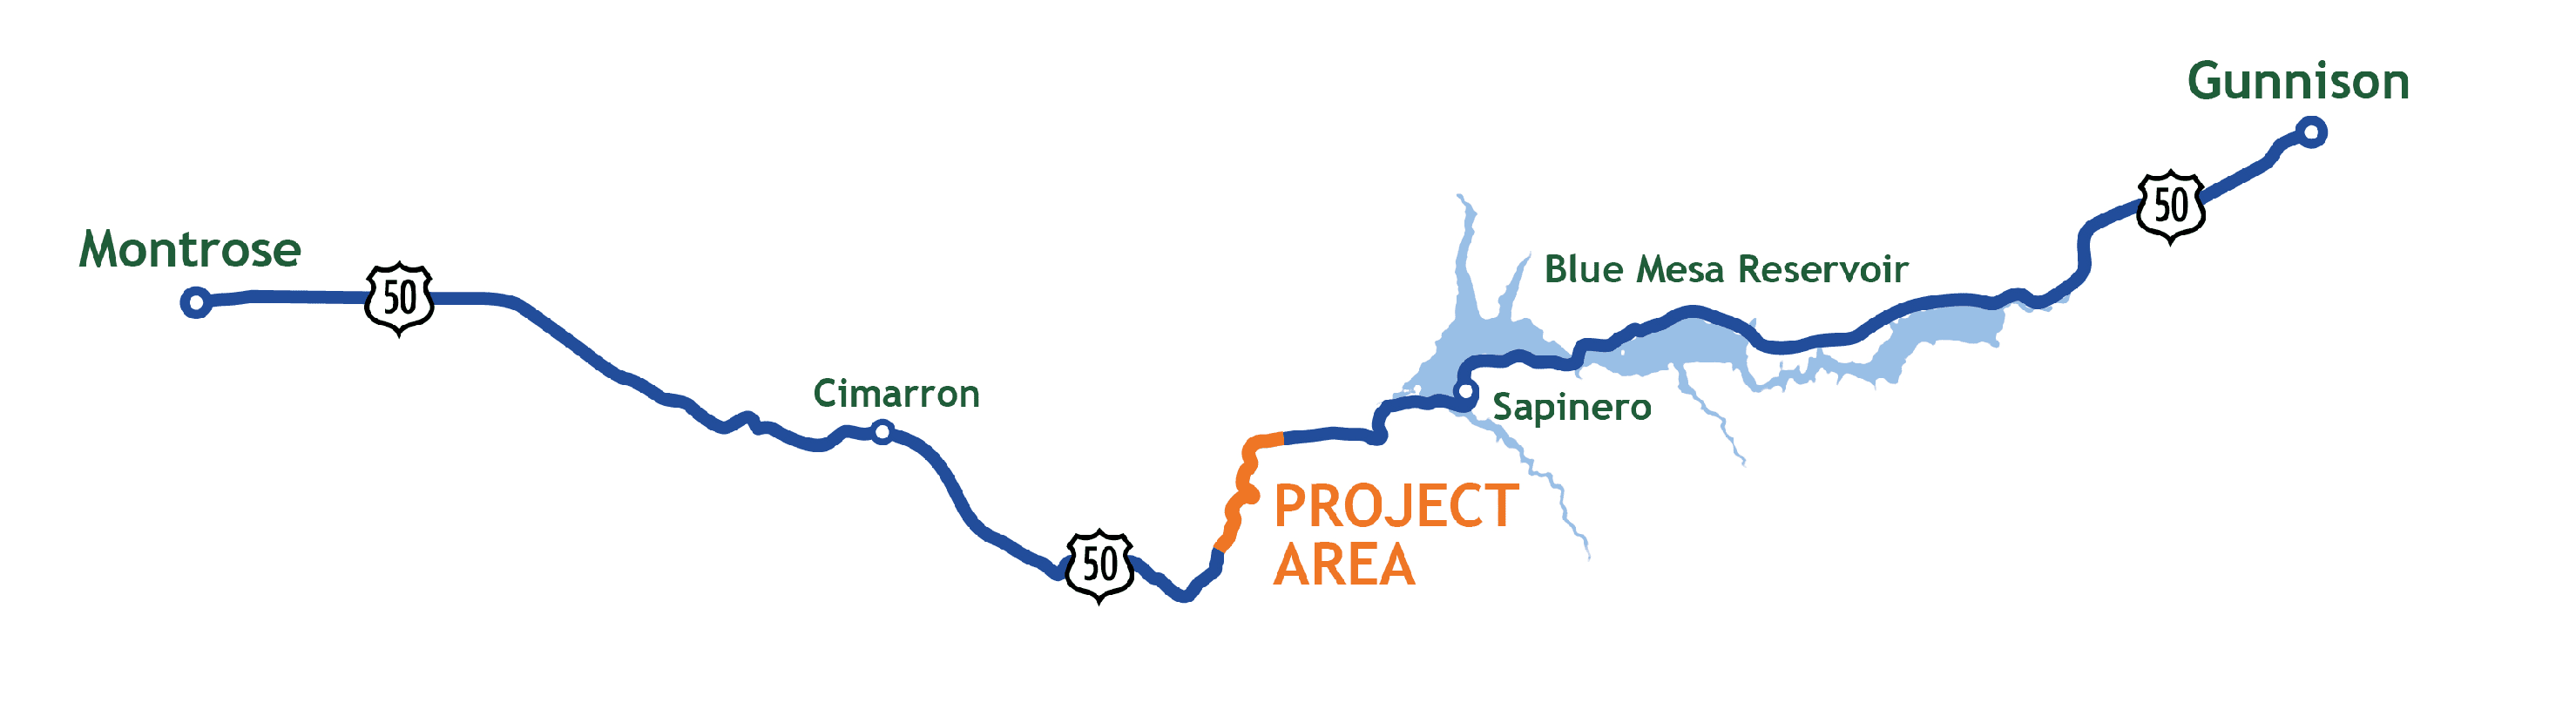 US 50 project map detail image